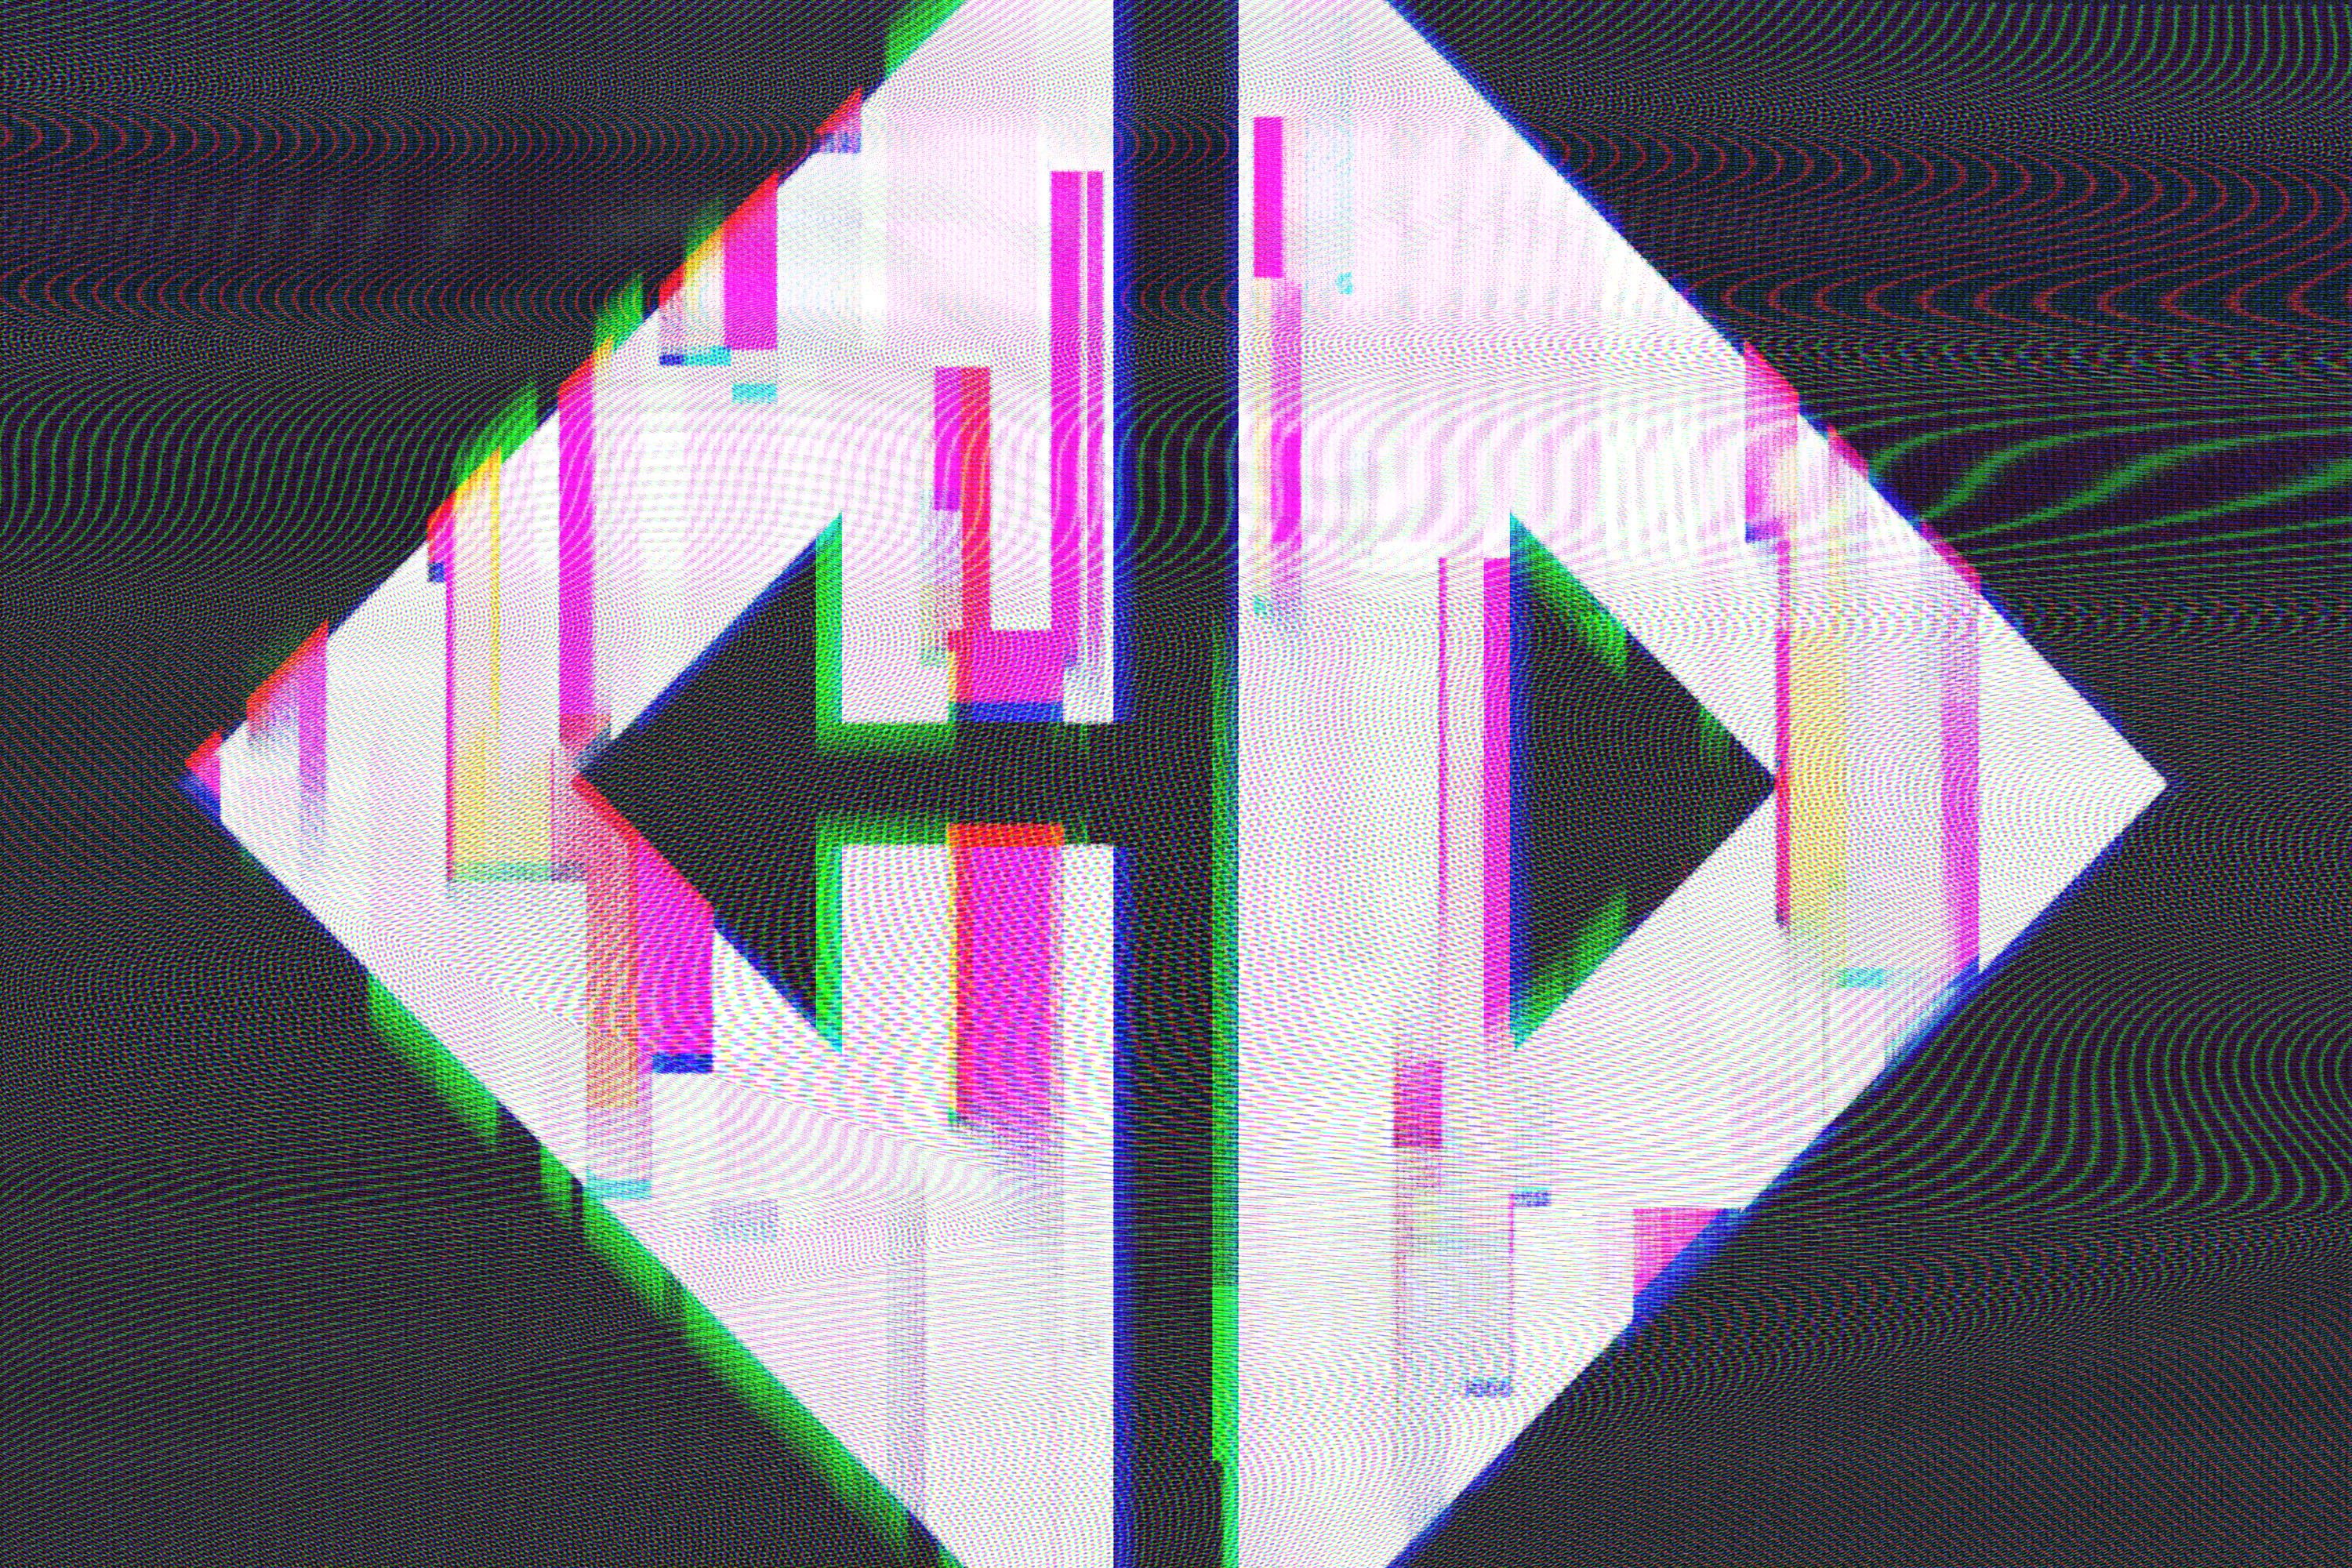 Creepy VHS Glitch Effectpreview image.